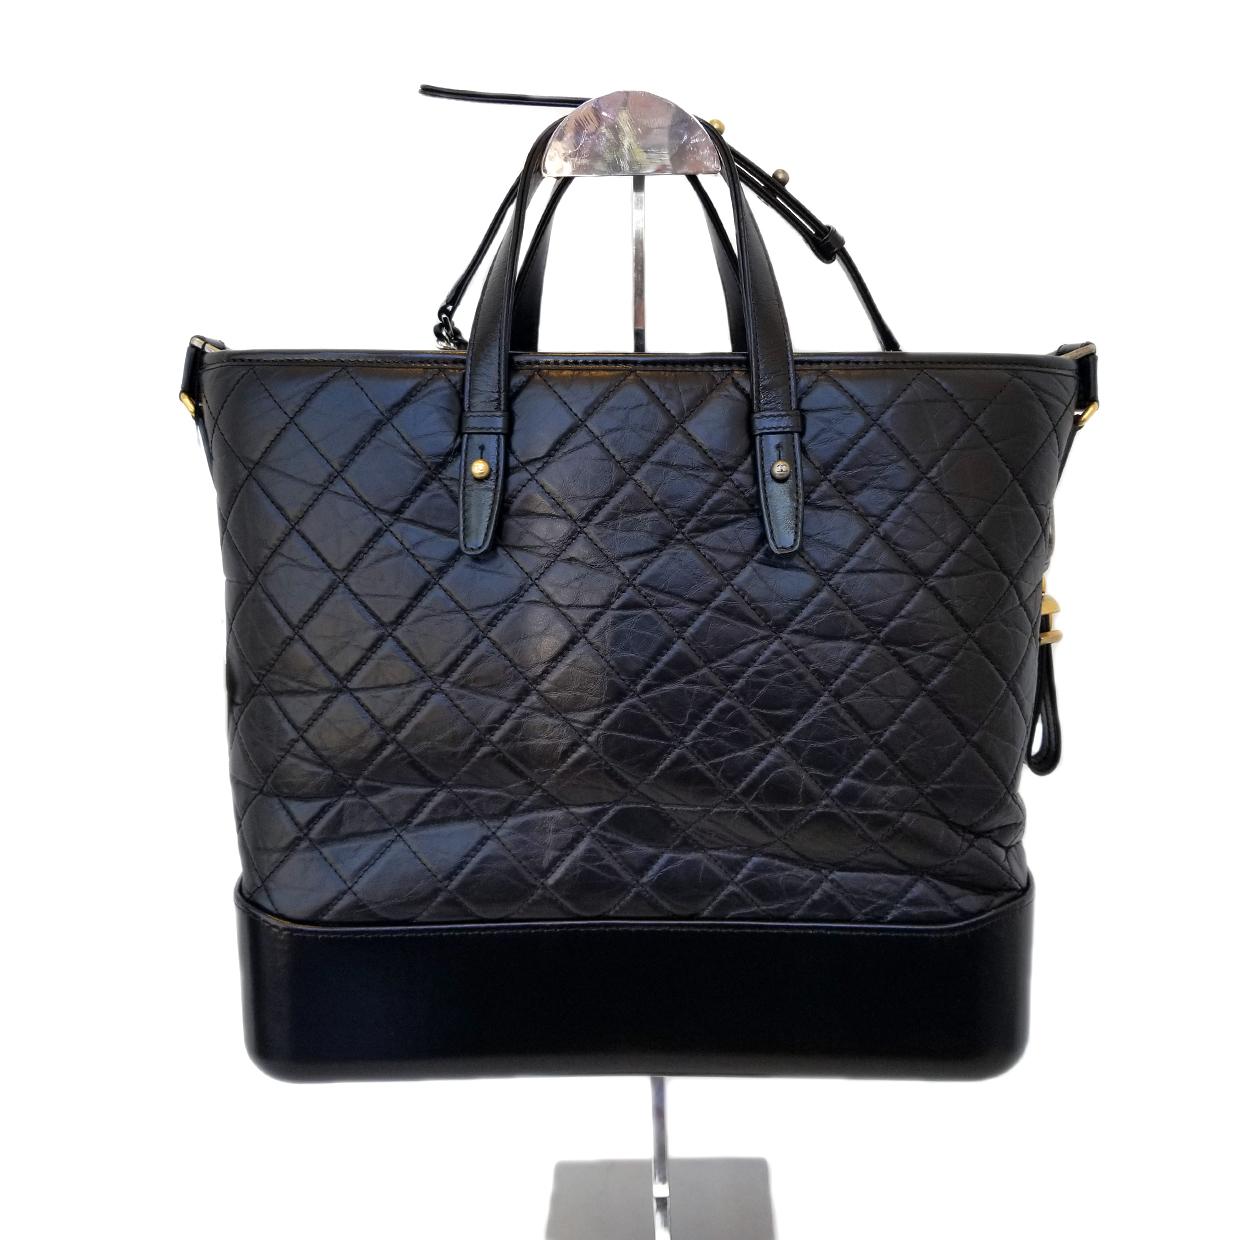 Brand - Chanel
Collection - Gabrielle
Estimated Retail - $4,600.00
Style - Hobo Bag
Material - Calfskin Leather
Color - Black
Pattern - Quilted
Closure - Zip
Hardware Material - Multitonal
Model/Date Code - A93823
Comes With - Box, Dustbag, Designer